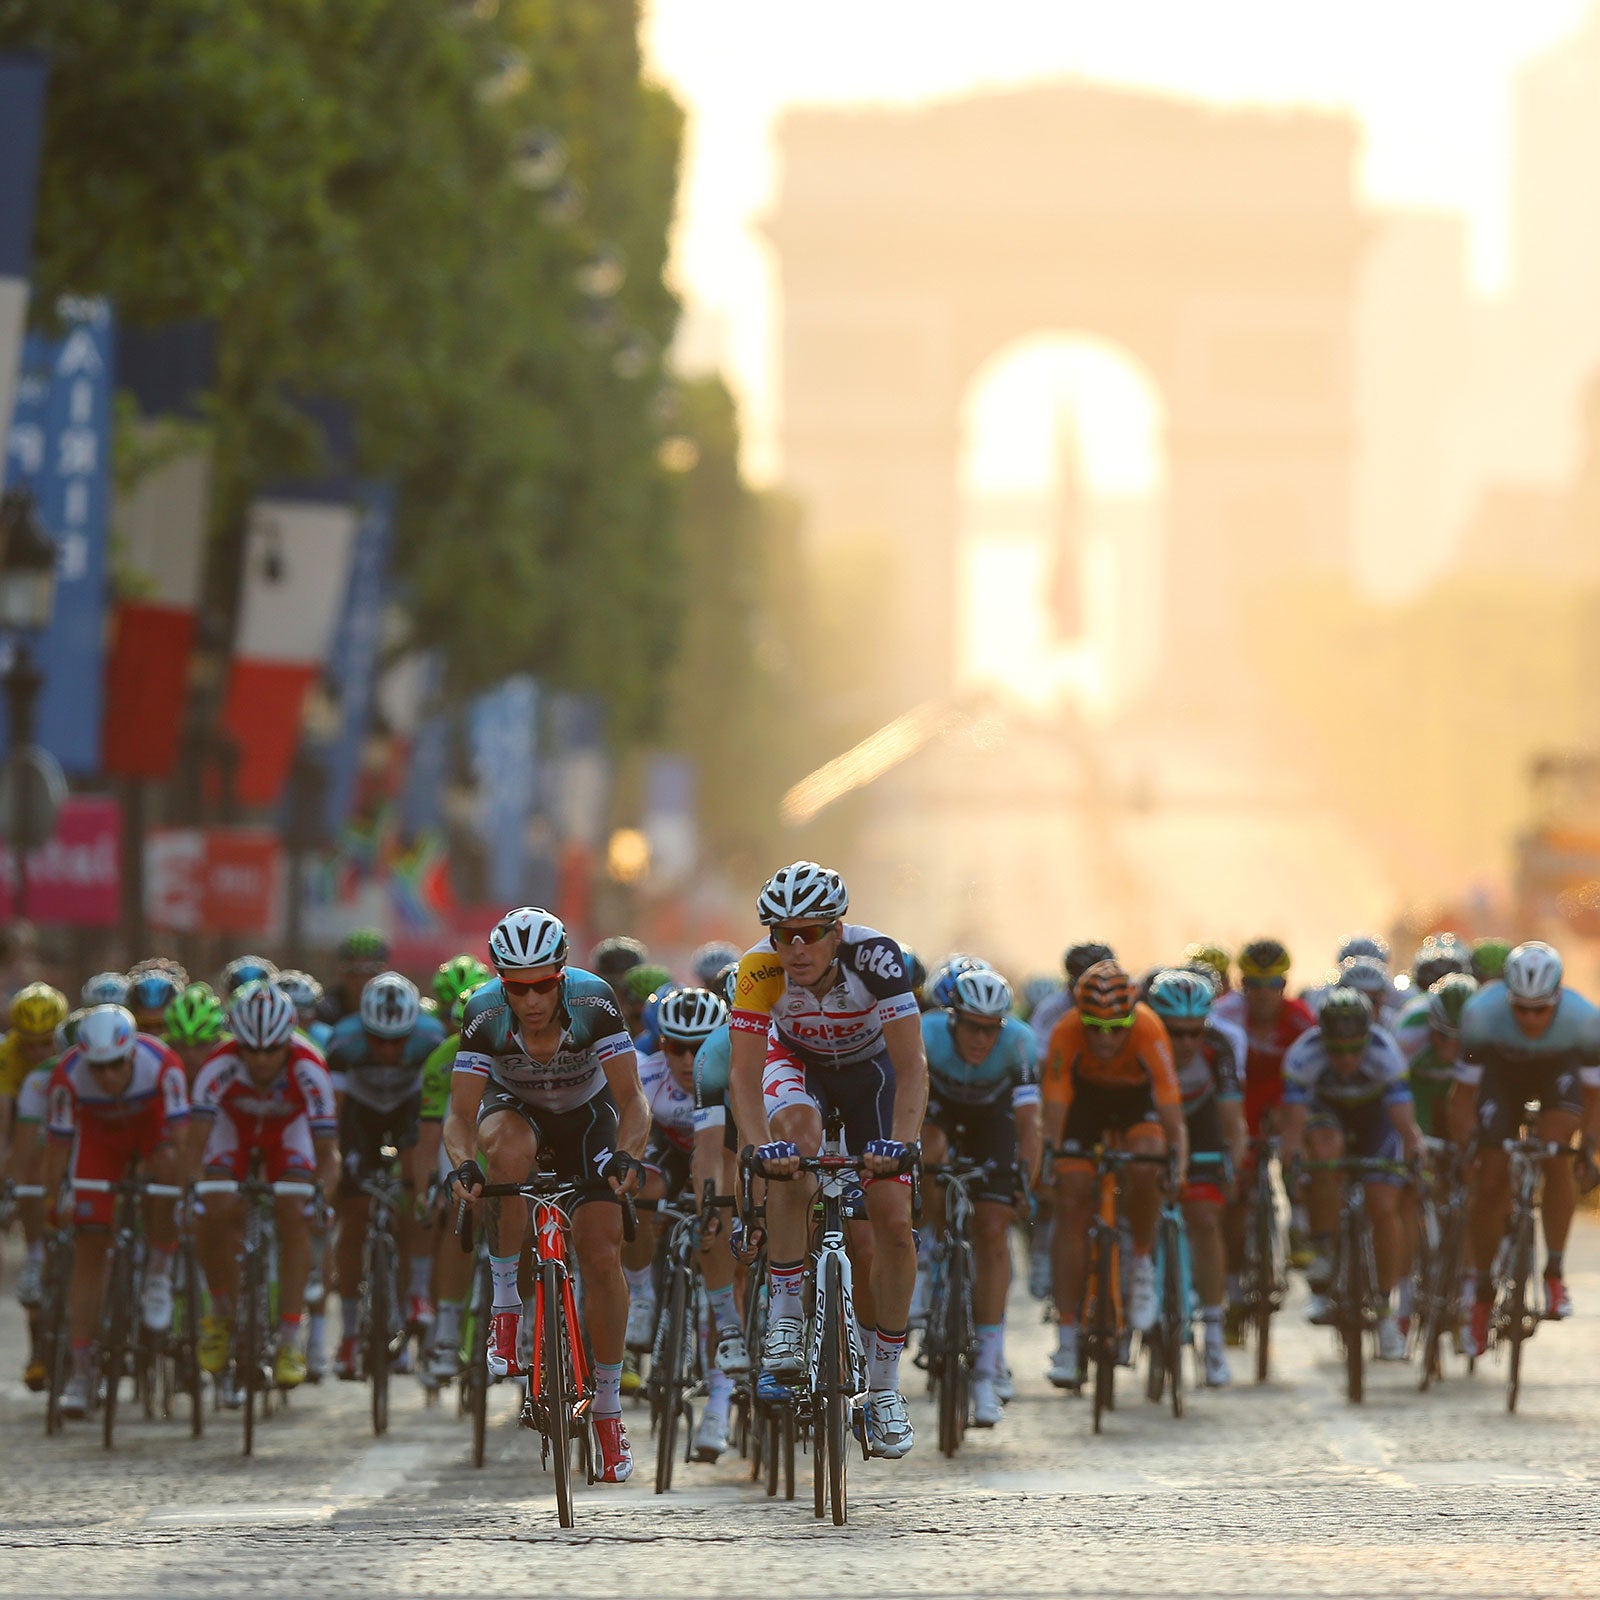 How to Watch the 2019 Tour de France Online